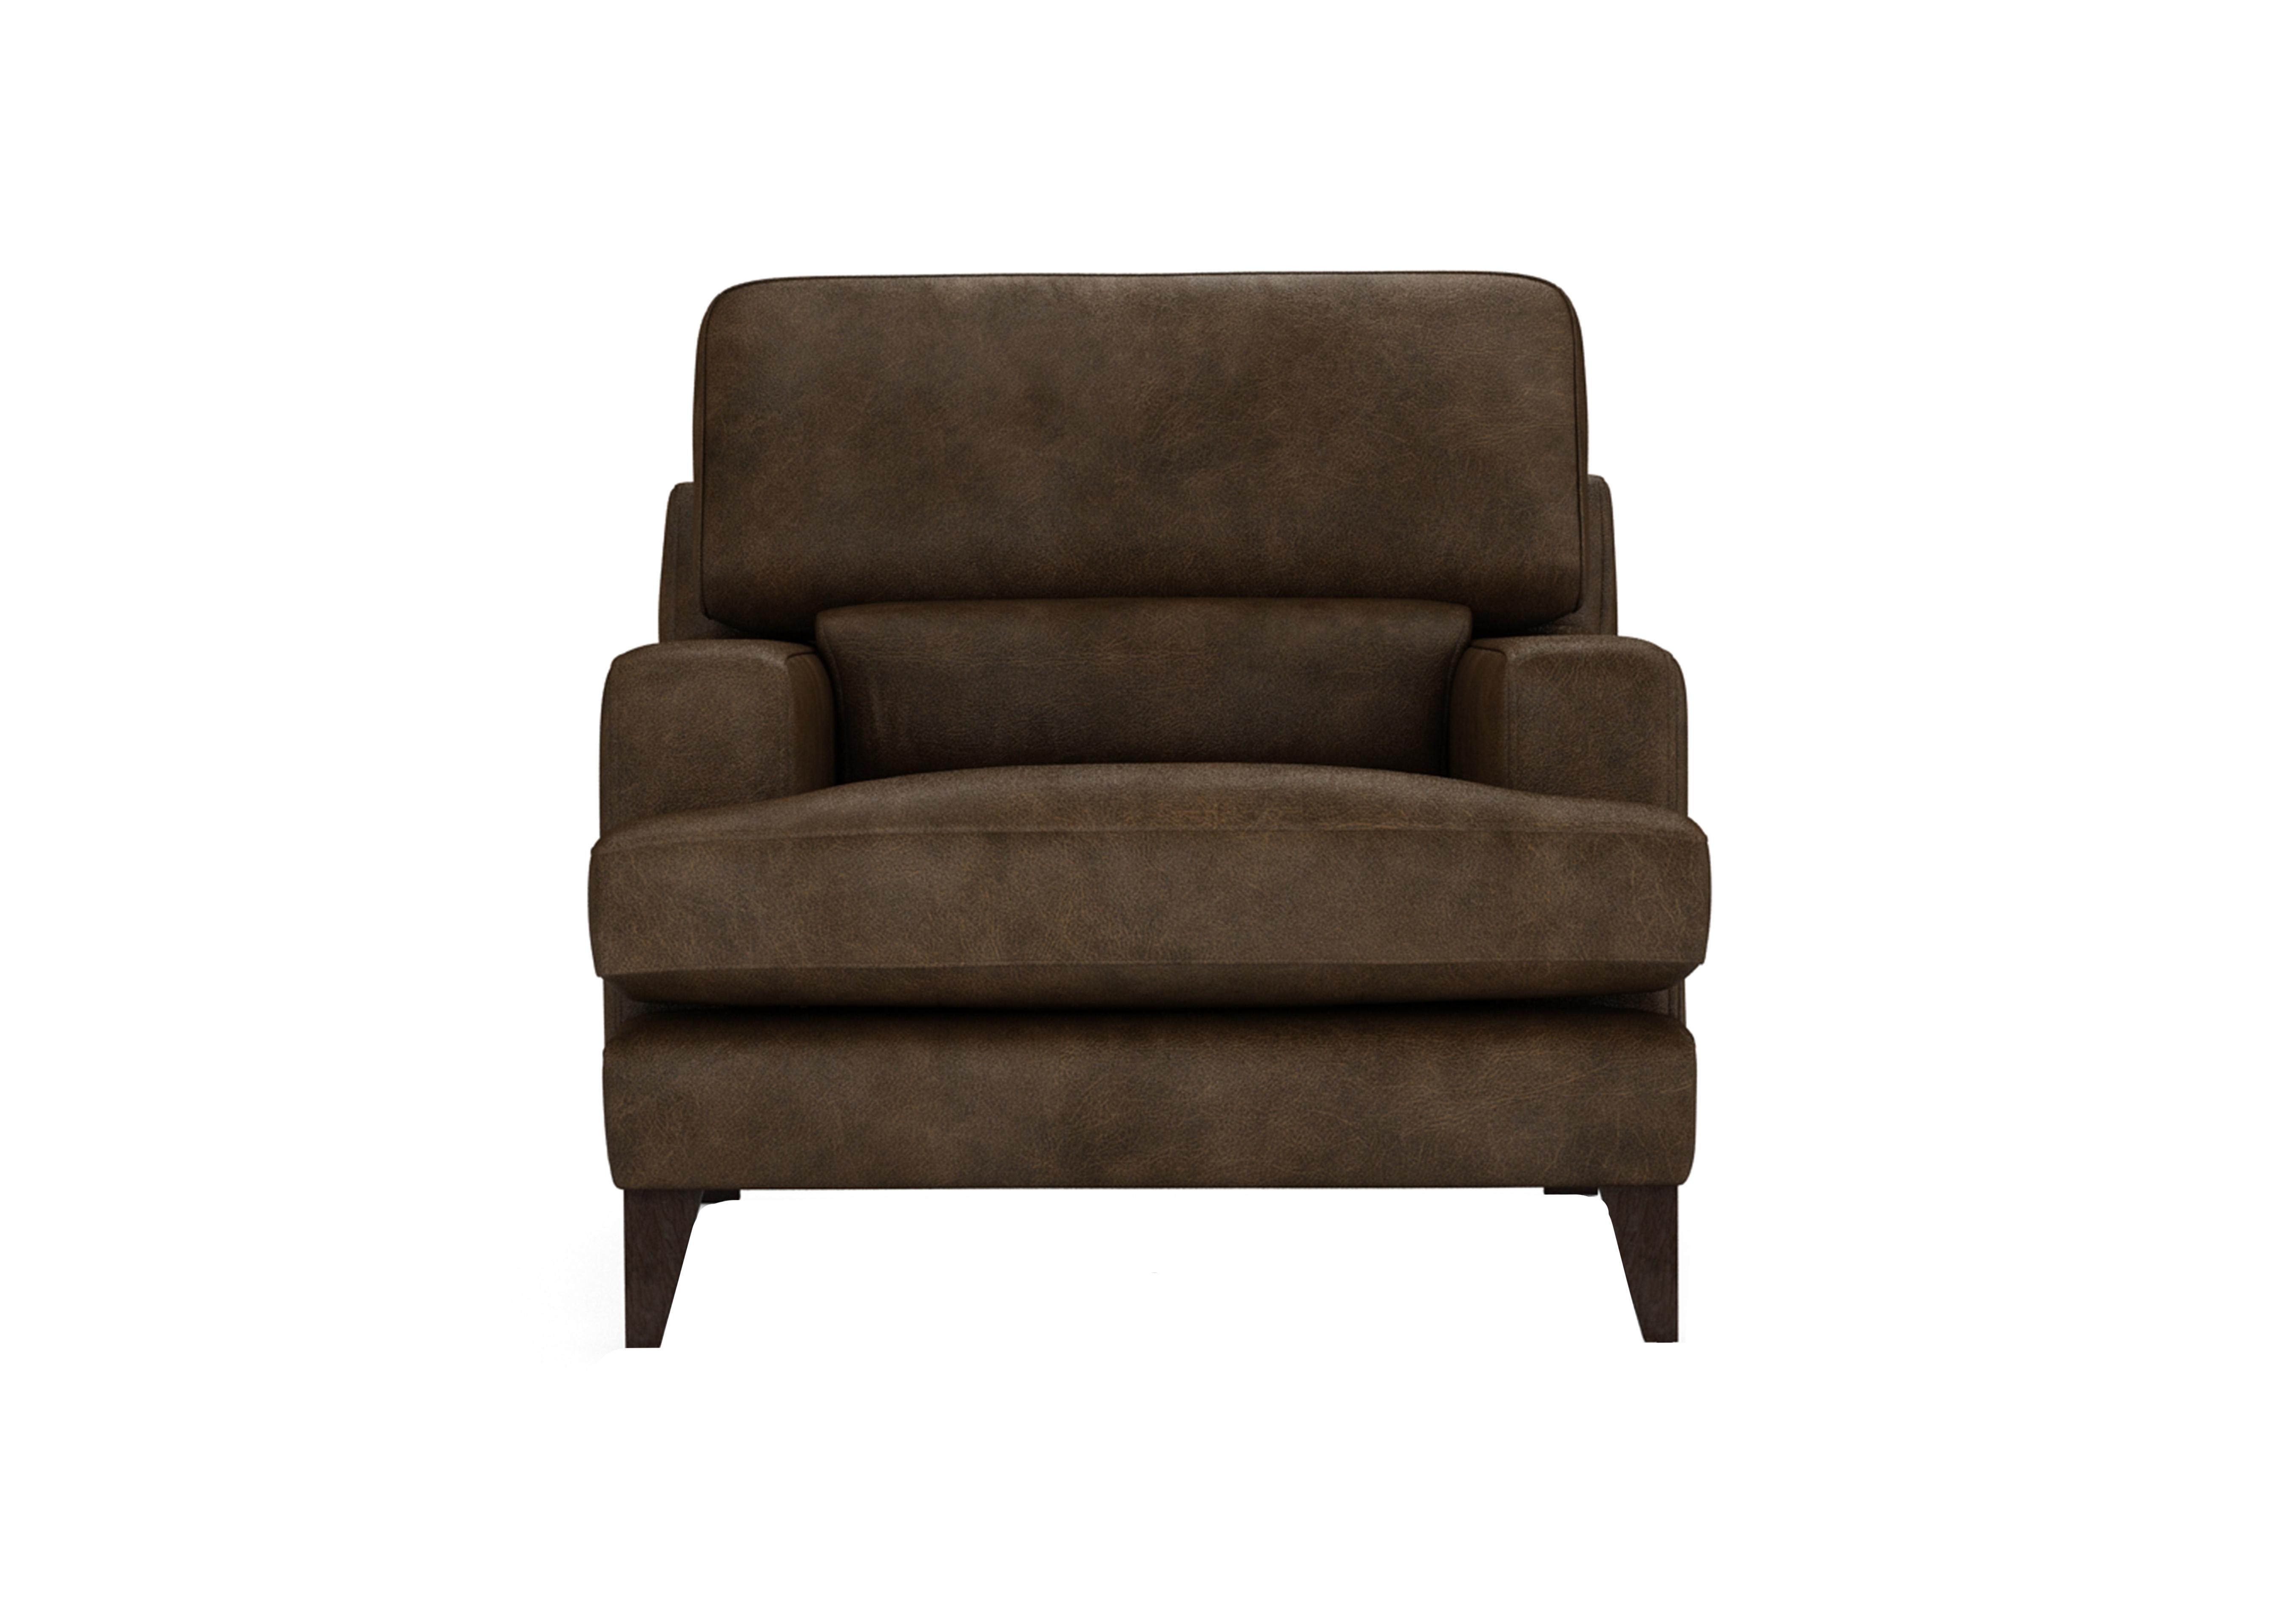 Romilly Leather Armchair in Bou192 Bourbon Wa Ft on Furniture Village